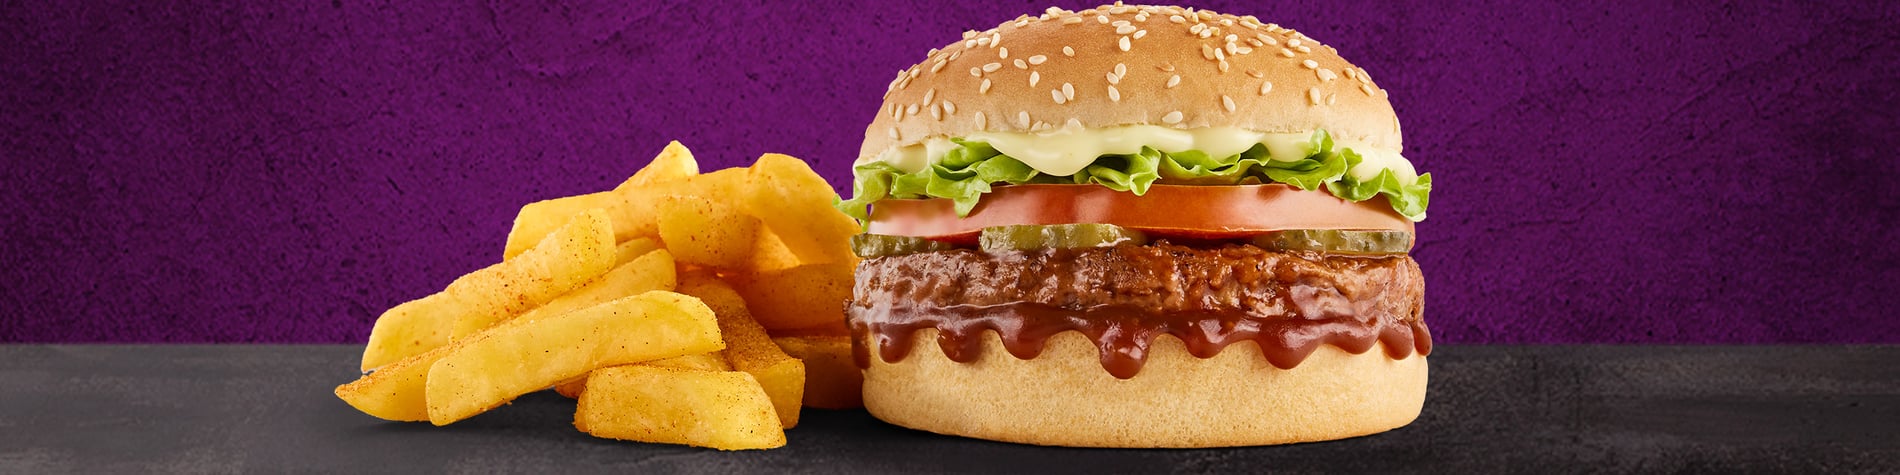 The NEW Mo’MjojoTM Burger Meal from Steers® Engen Highveld Technopark. 2 Flame-Grilled pure beef patties, pineapple, macon, tomato, lettuce, and small Famous Hand-Cut Chips, on a purple background.